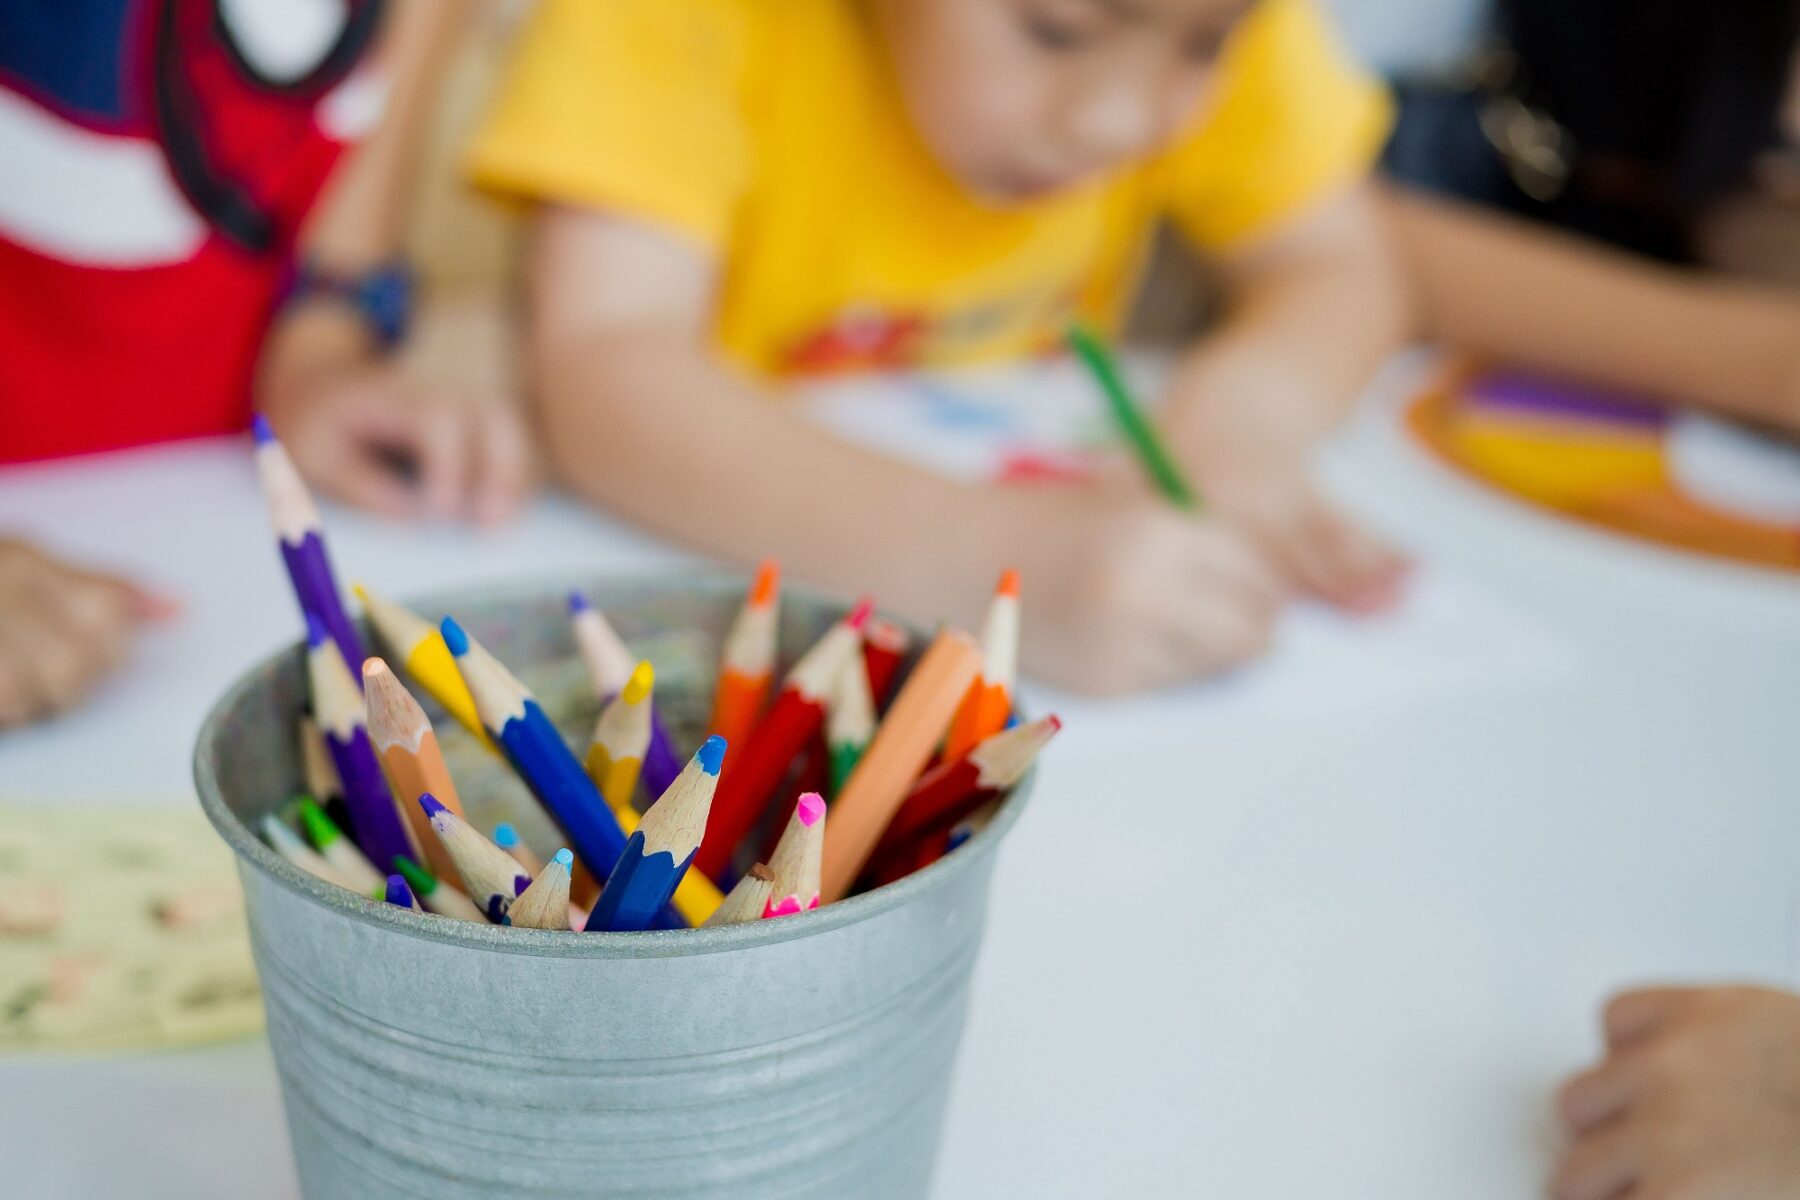 Colored pencils in a small bucket. Children coloring at a table.